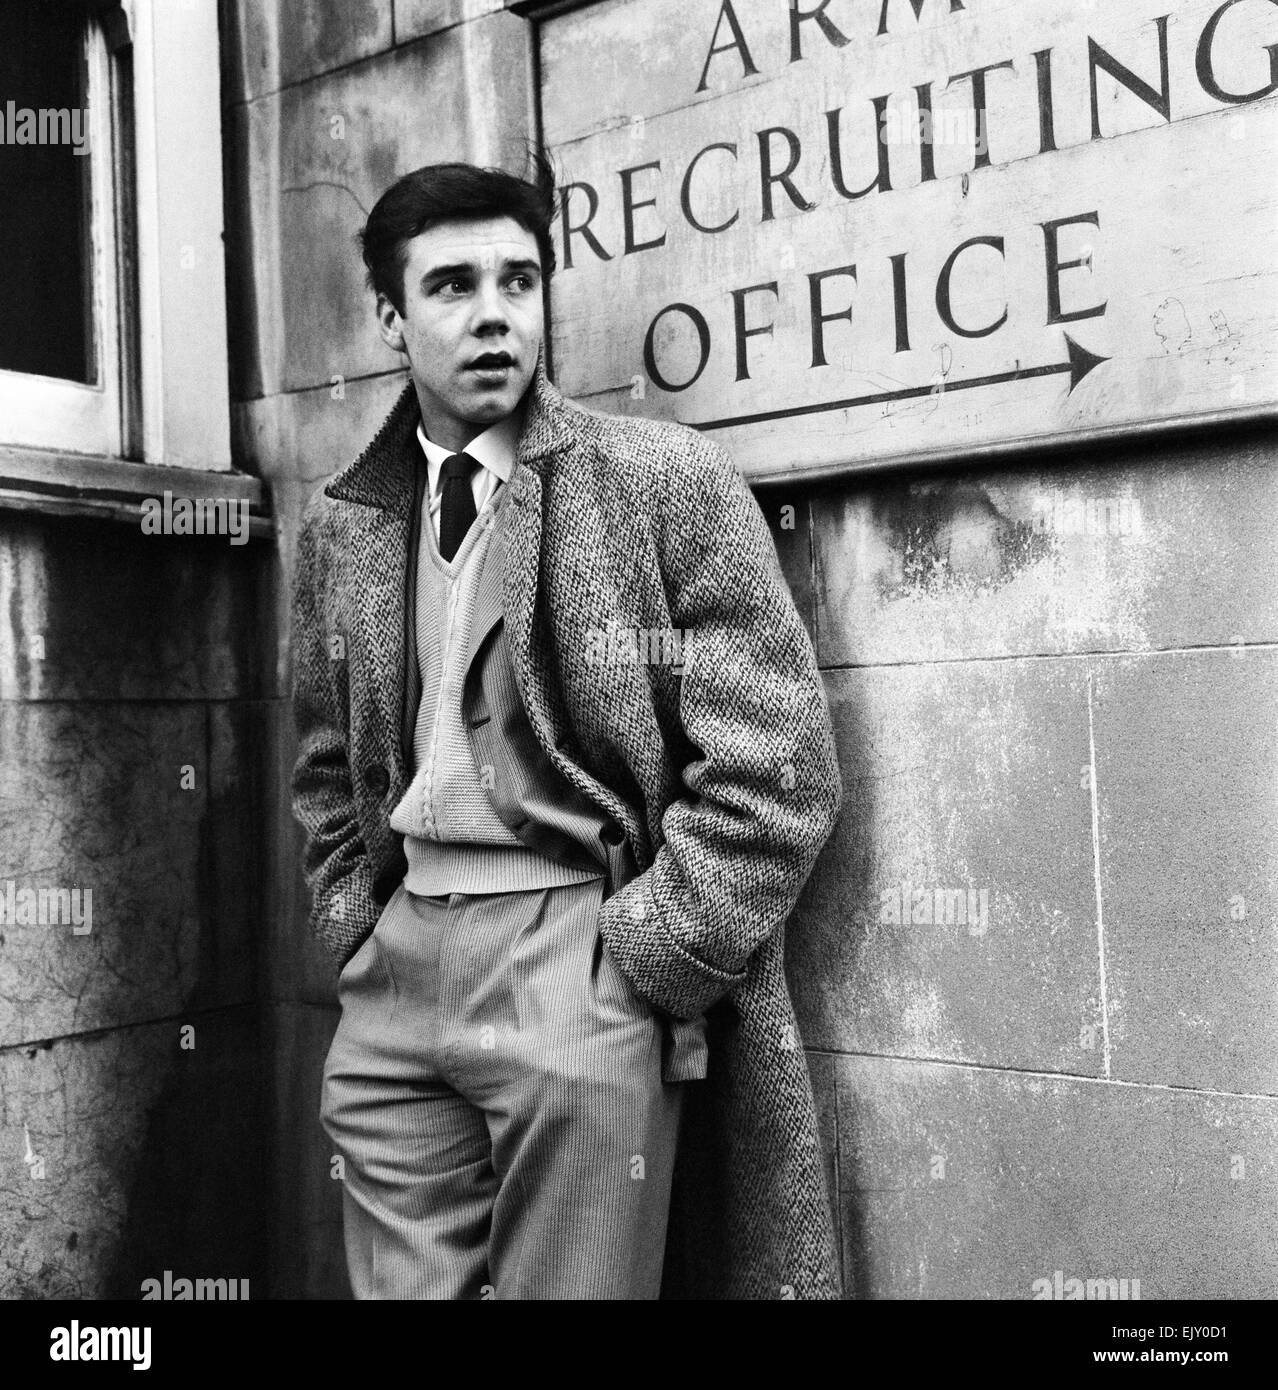 Marty Wilde, singer, pictured outside Army Recruiting Office ahead of his National Service Medical, 3rd February 1959. *** Local Caption *** Army Recruitment Centre  Ministry of Labour and National Service  Medical Board Entrance Stock Photo